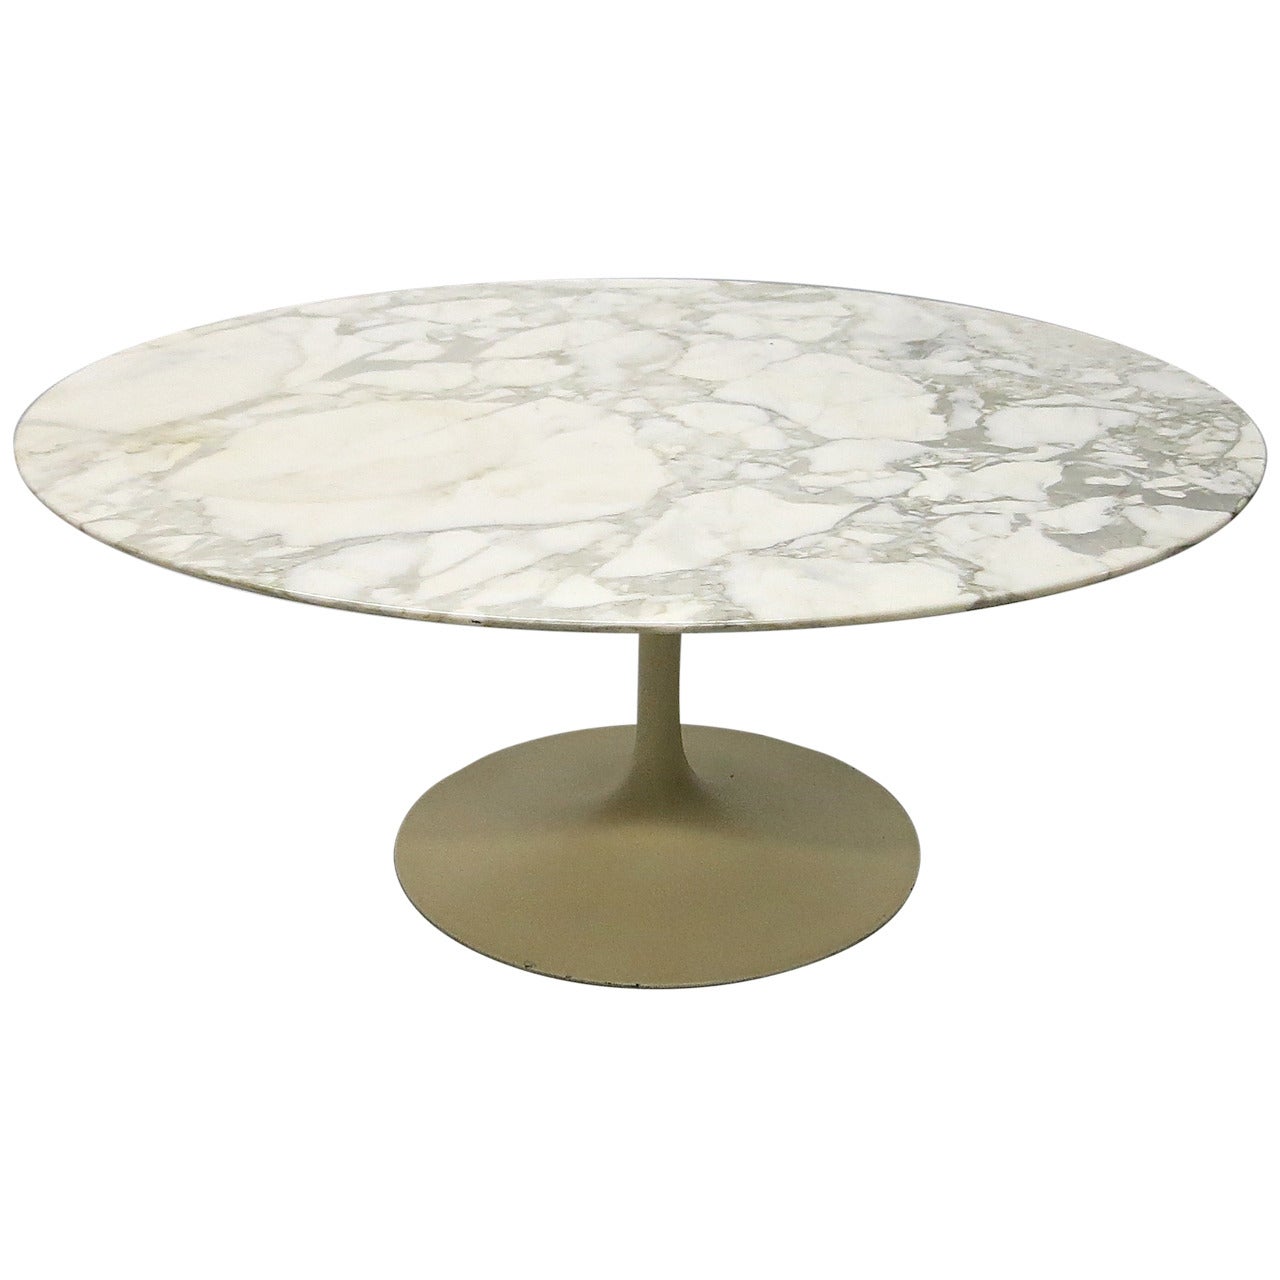 Round Marble Coffee Table Designed by Eero Saarinen for Knoll, USA, circa 1960